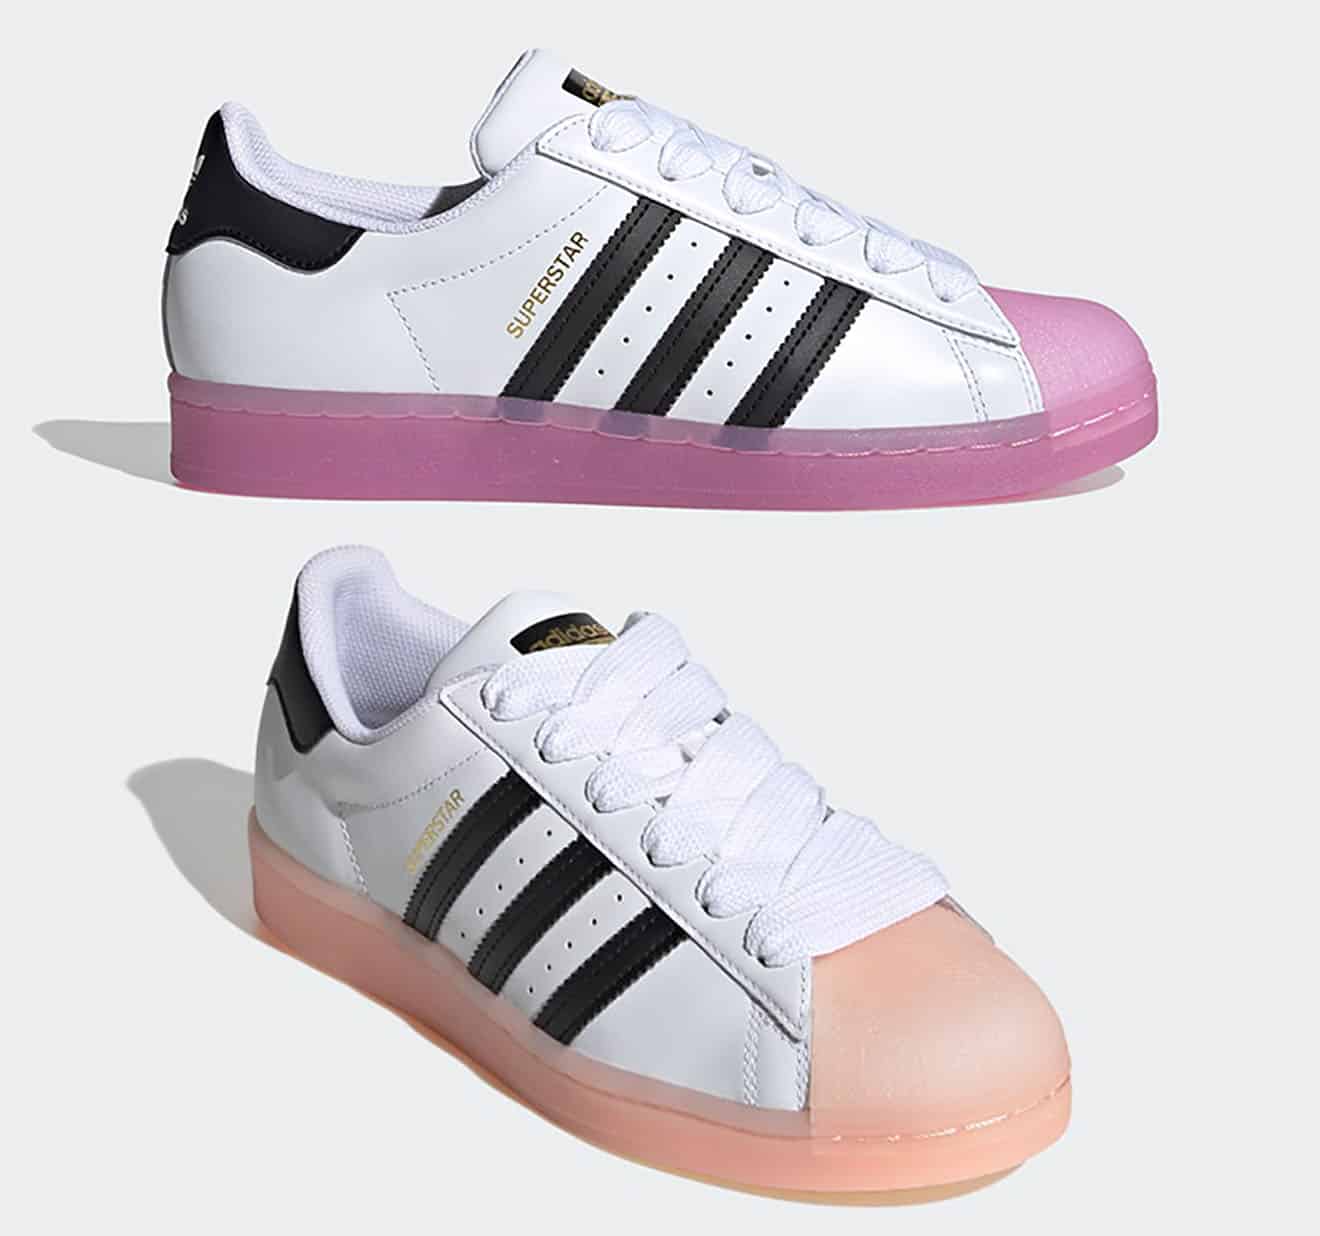 Adidas Superstar Jellys Are Bringing The Color